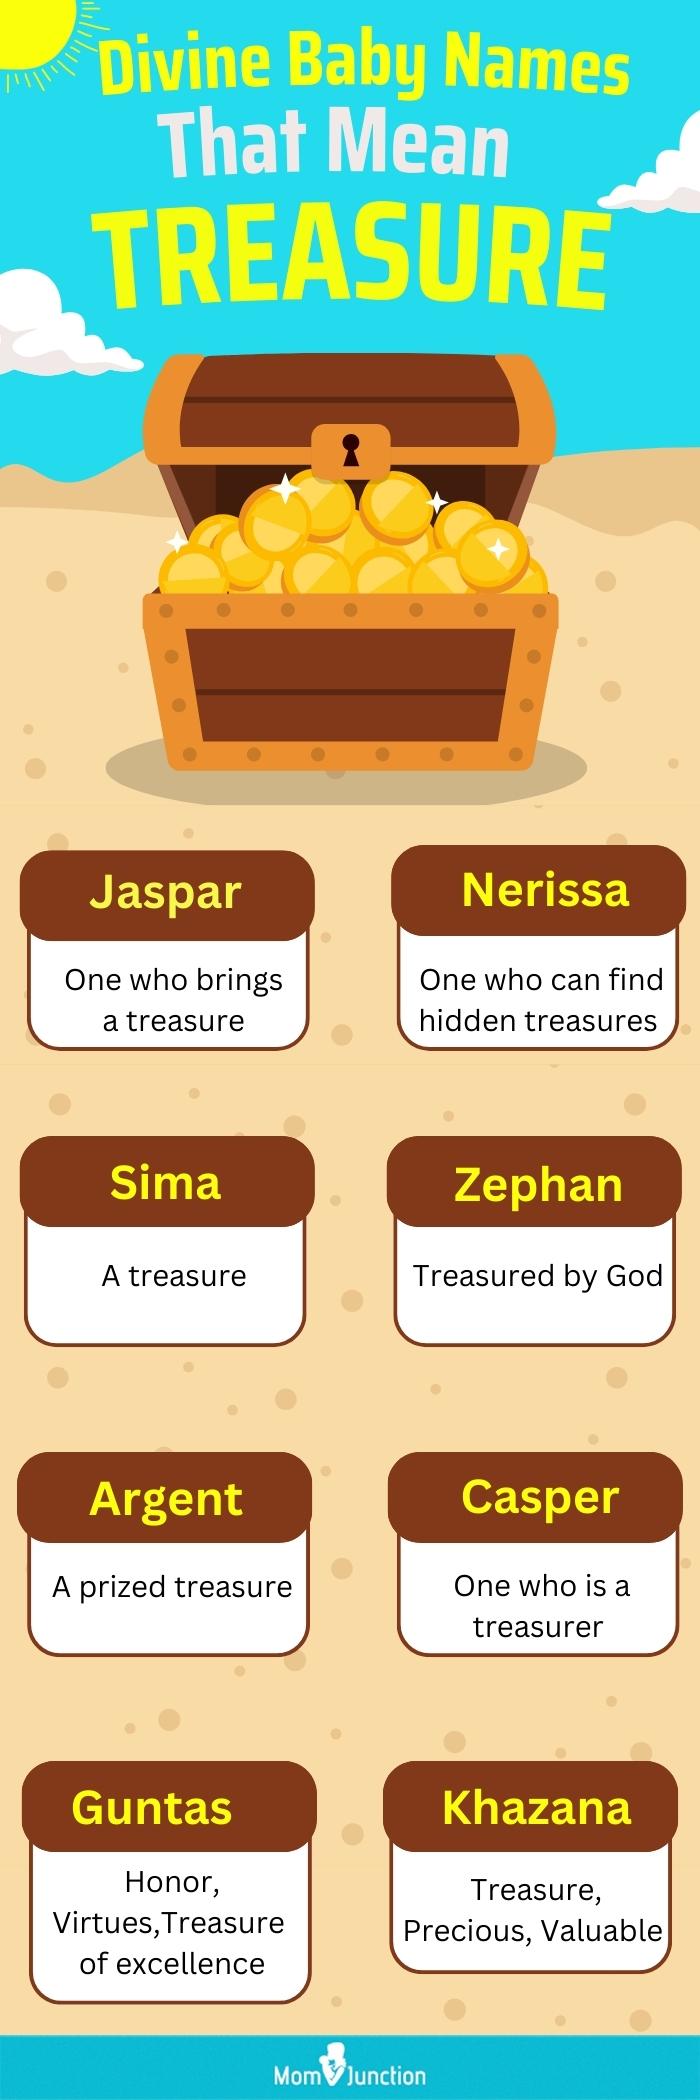 divine baby names that mean treasure (infographic)